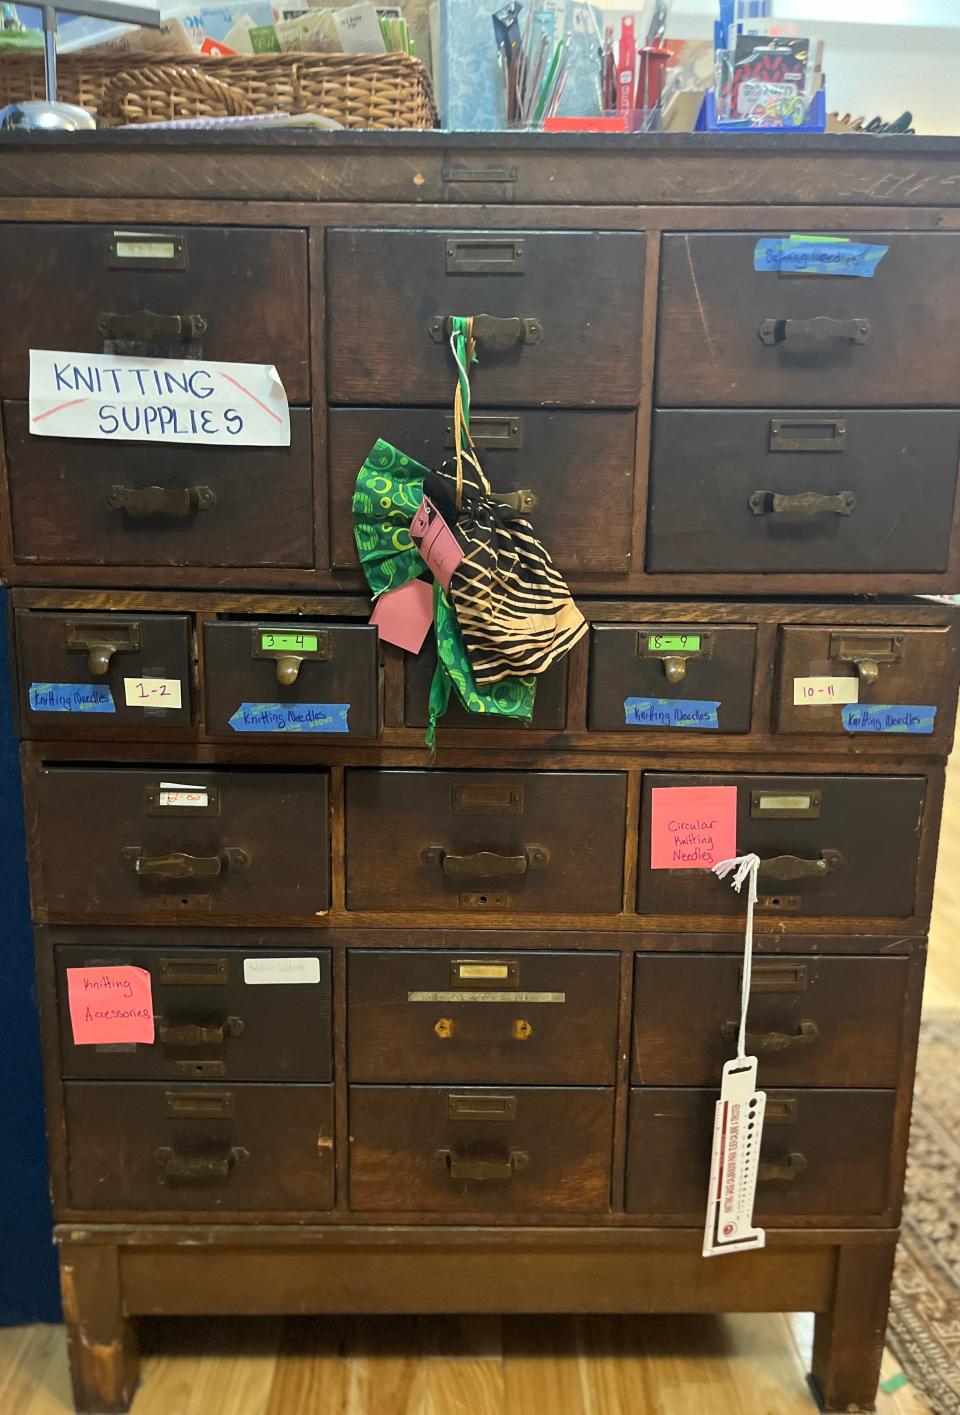 An old card catalog stores knitting supplies.